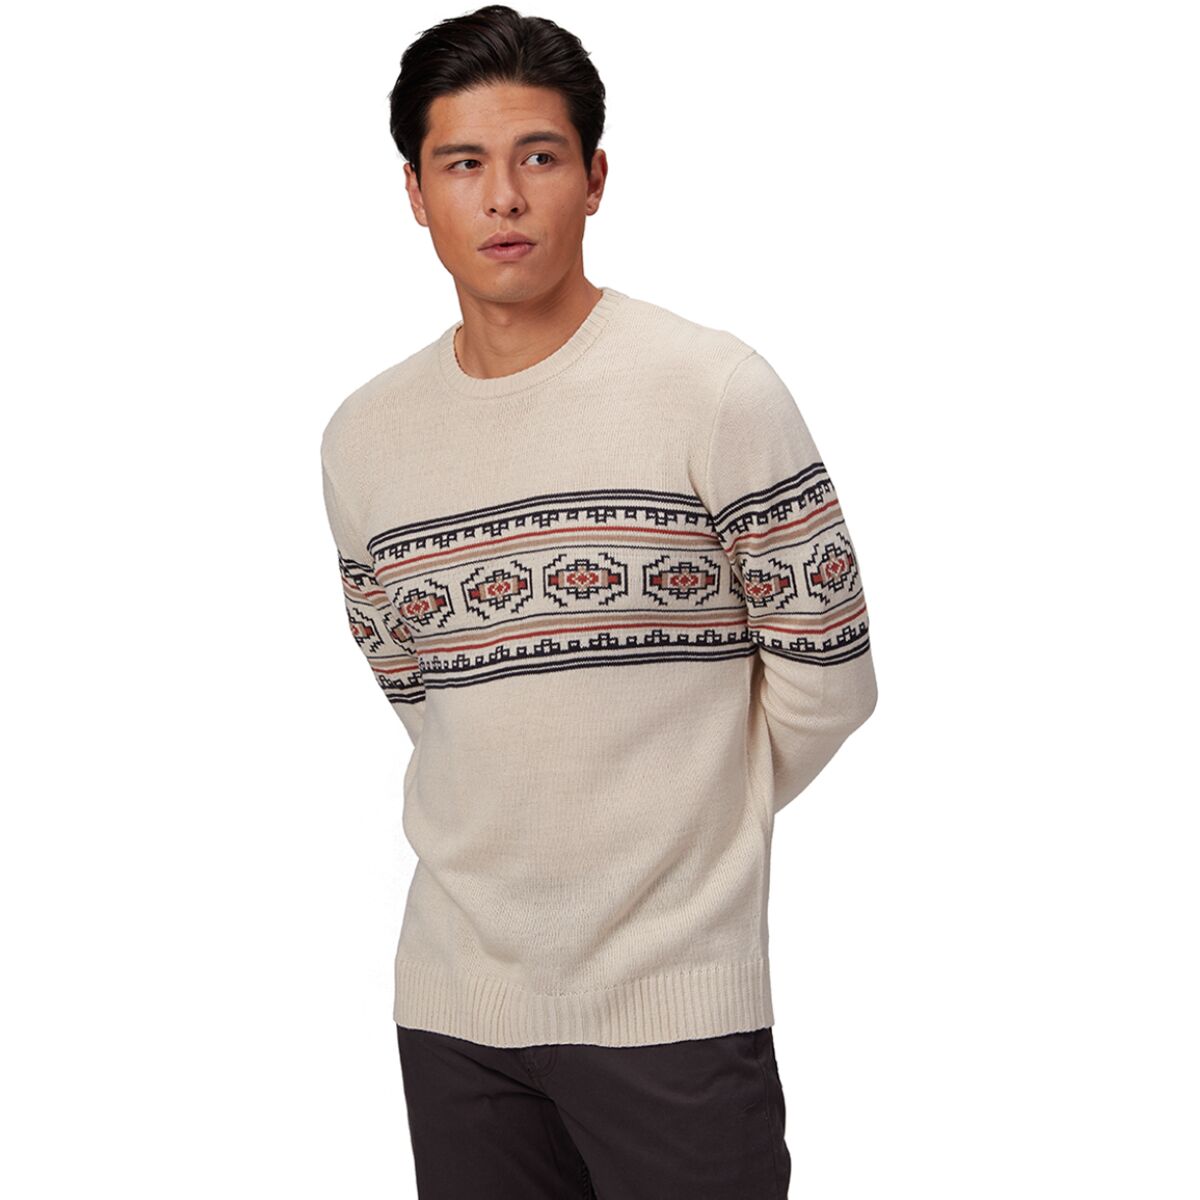 Fisherman Sweater - Men's by Stoic | US-Parks.com